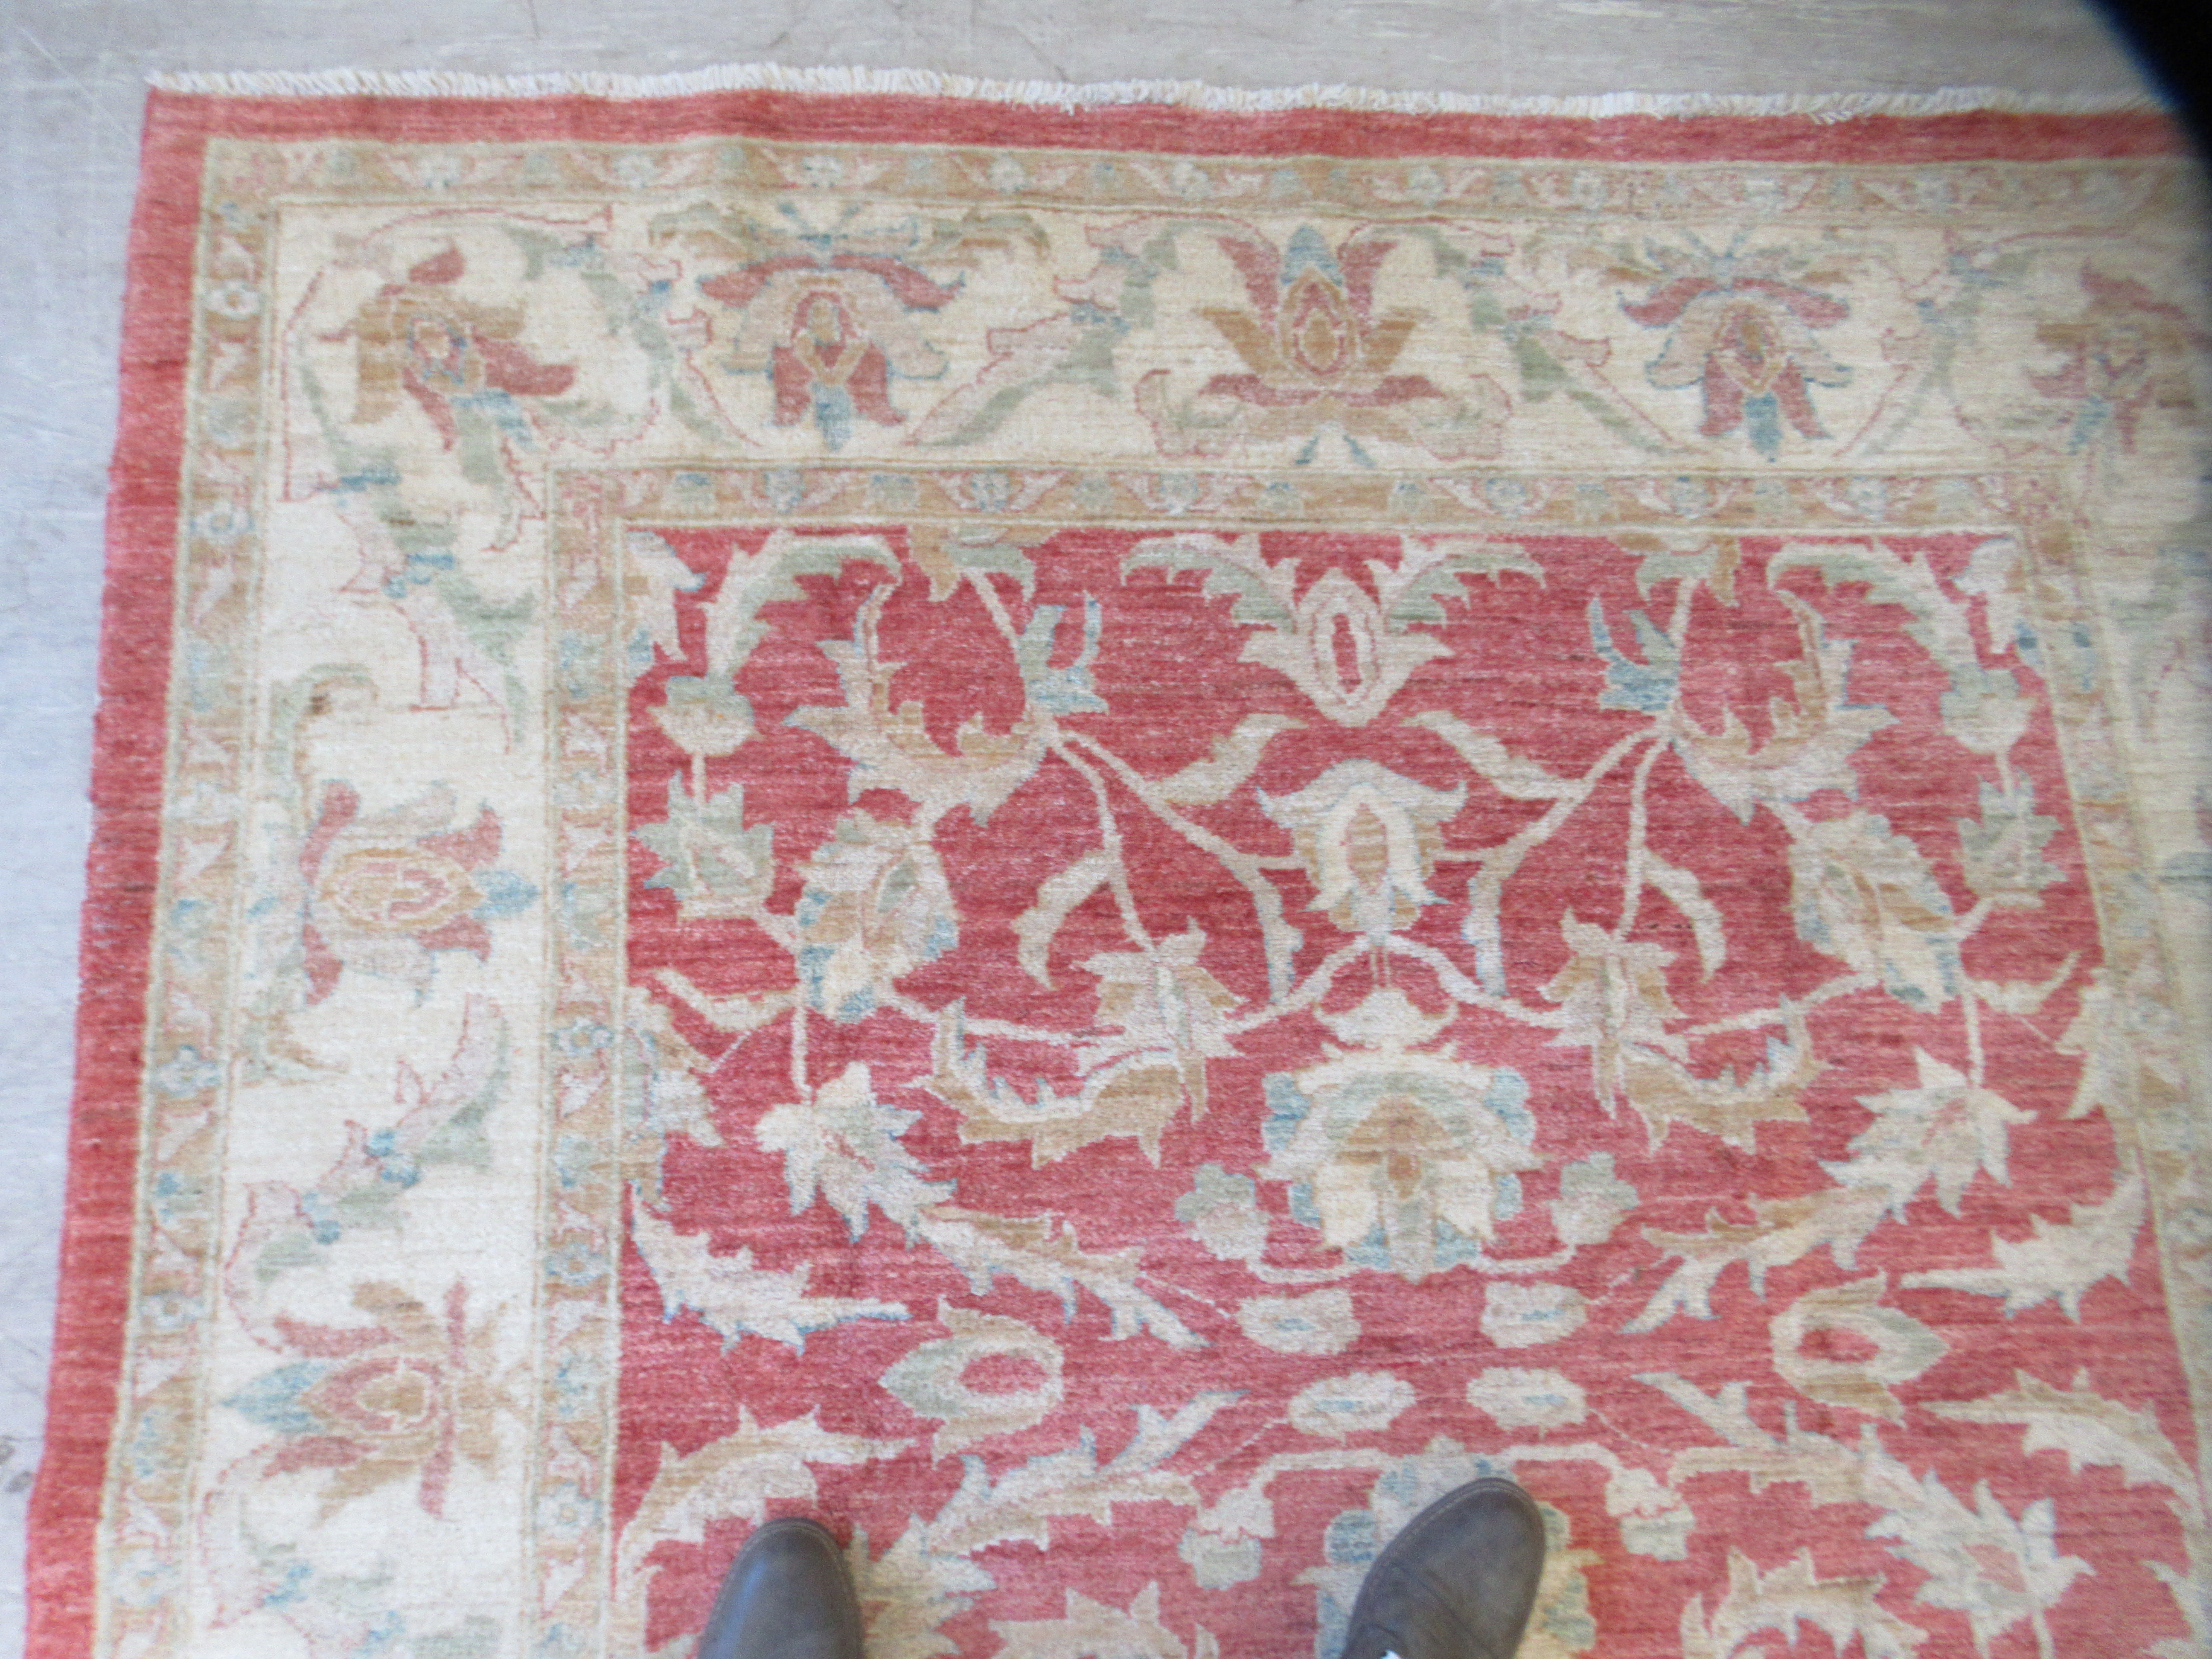 A Ziegler rug, decorated with foliate designs, on a red and cream coloured ground  79" x 78" - Image 4 of 6